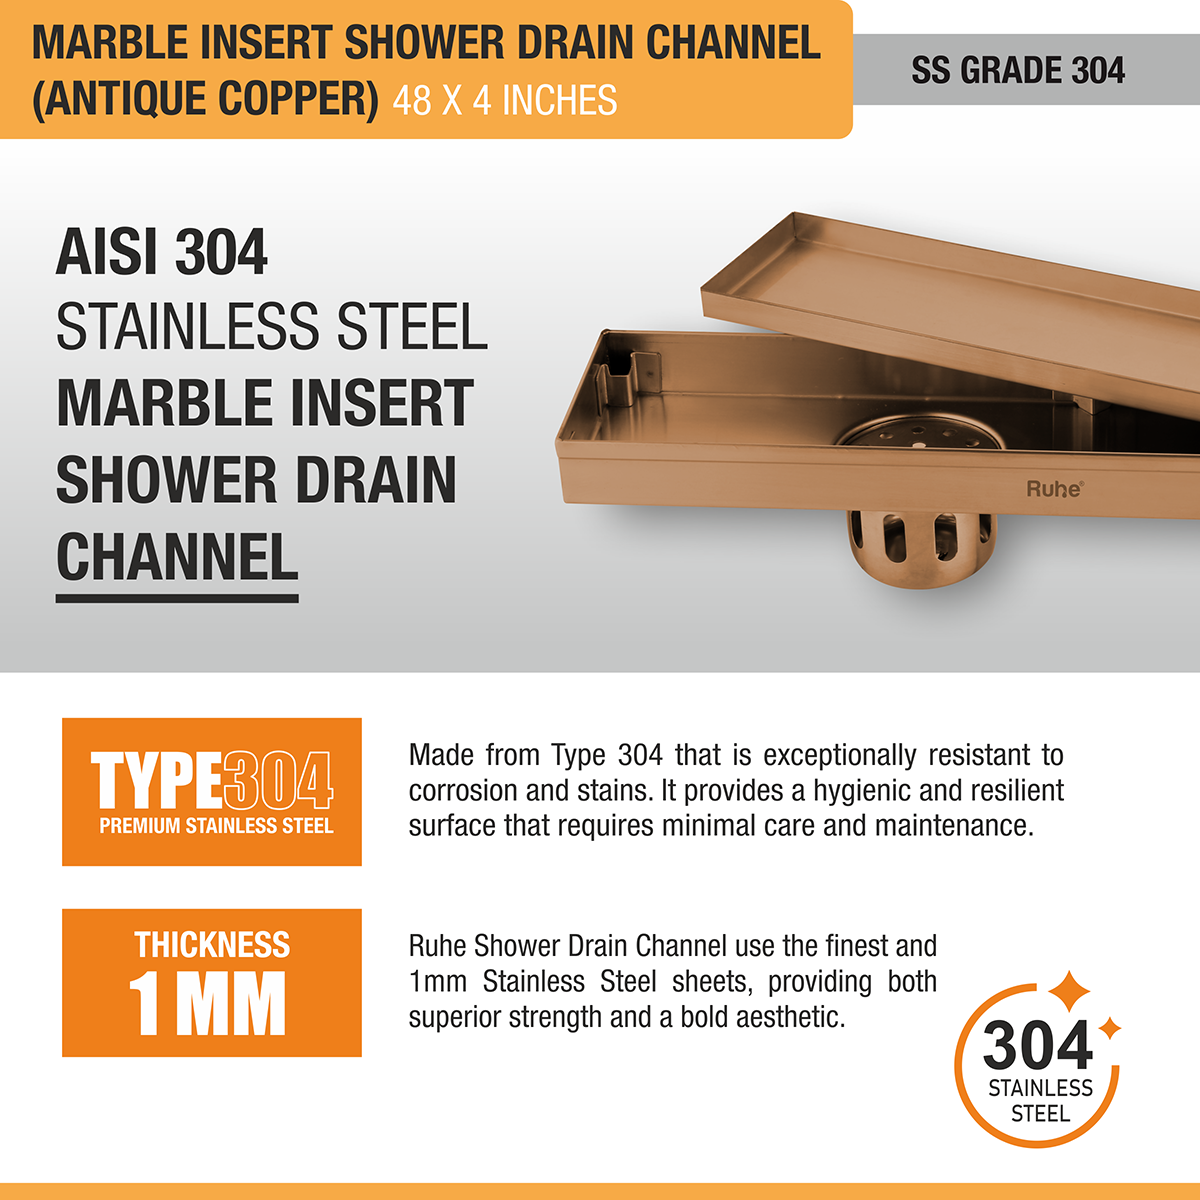 Marble Insert Shower Drain Channel (48 x 4 Inches) ROSE GOLD PVD Coated stainless steel